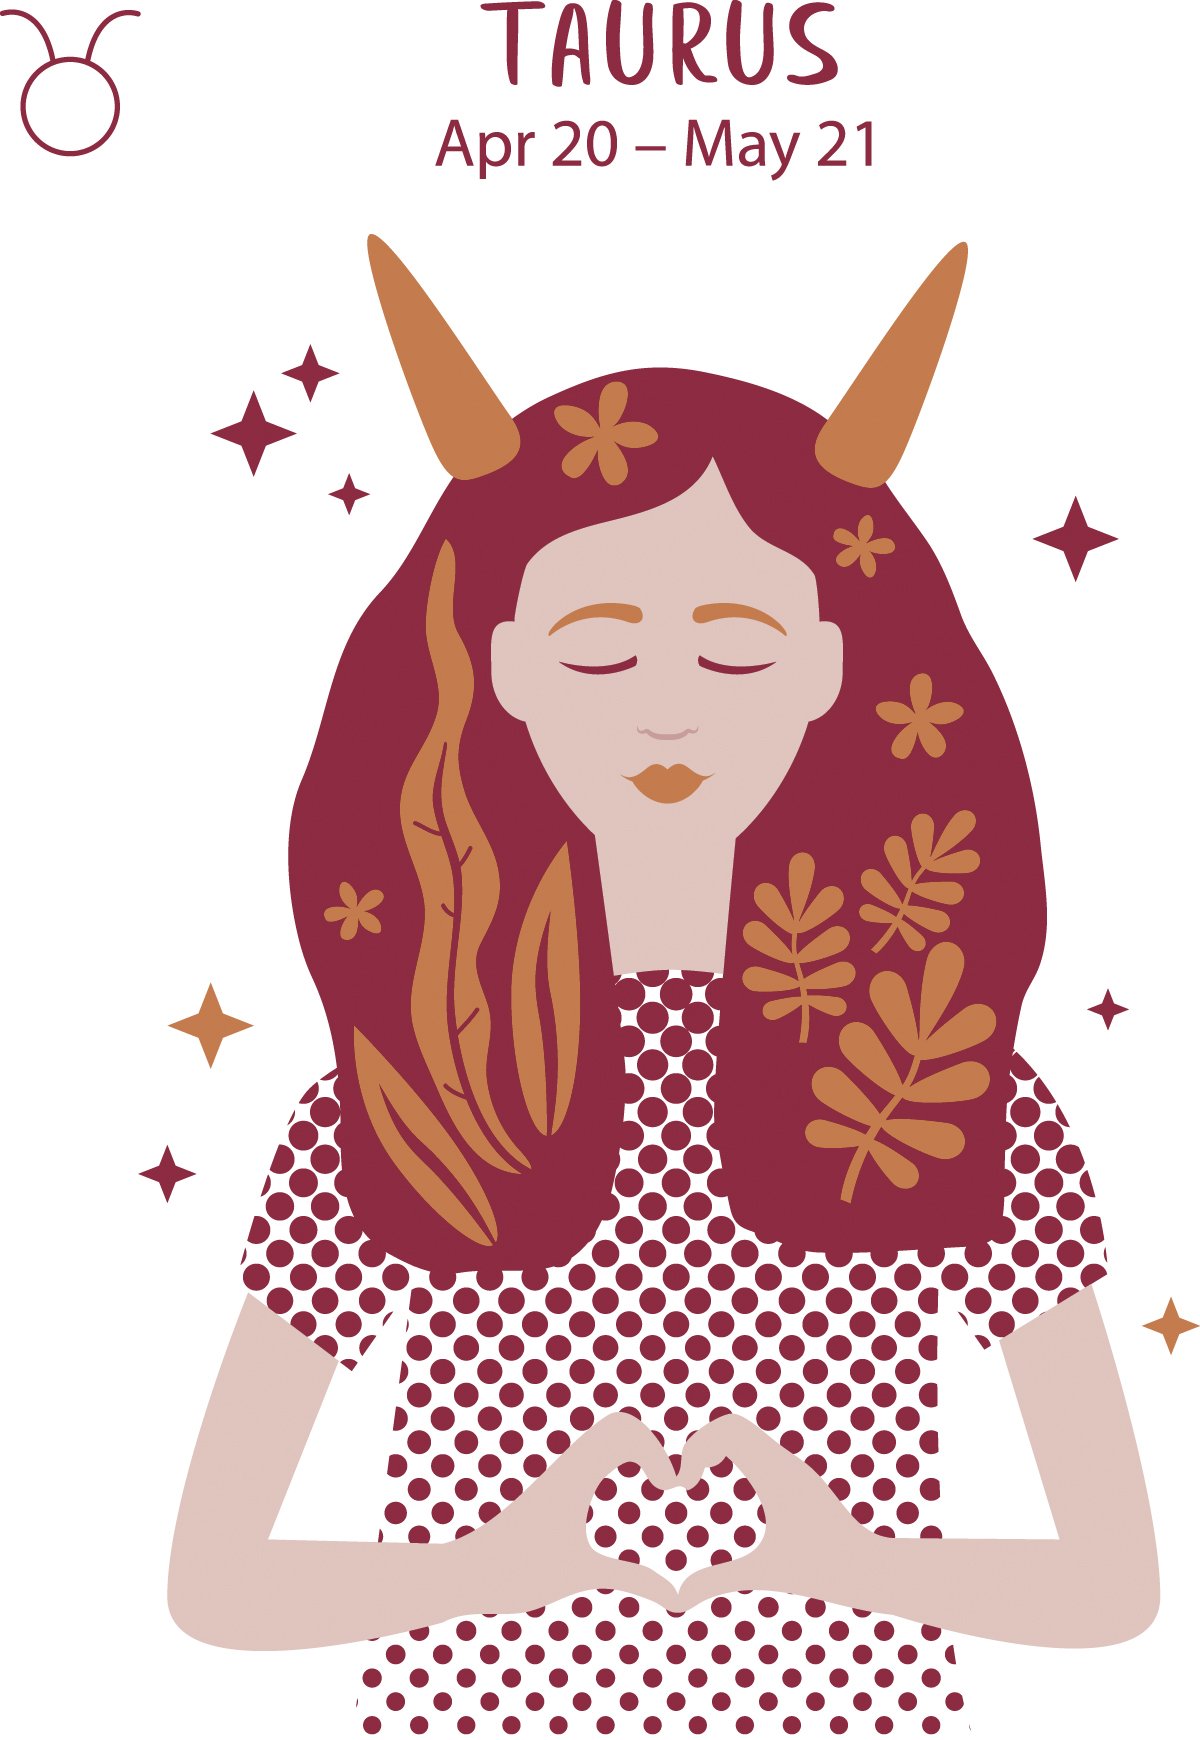 Taurus (April 20 - May 21) represented by a woman with short horns. | Photo: AmoMama